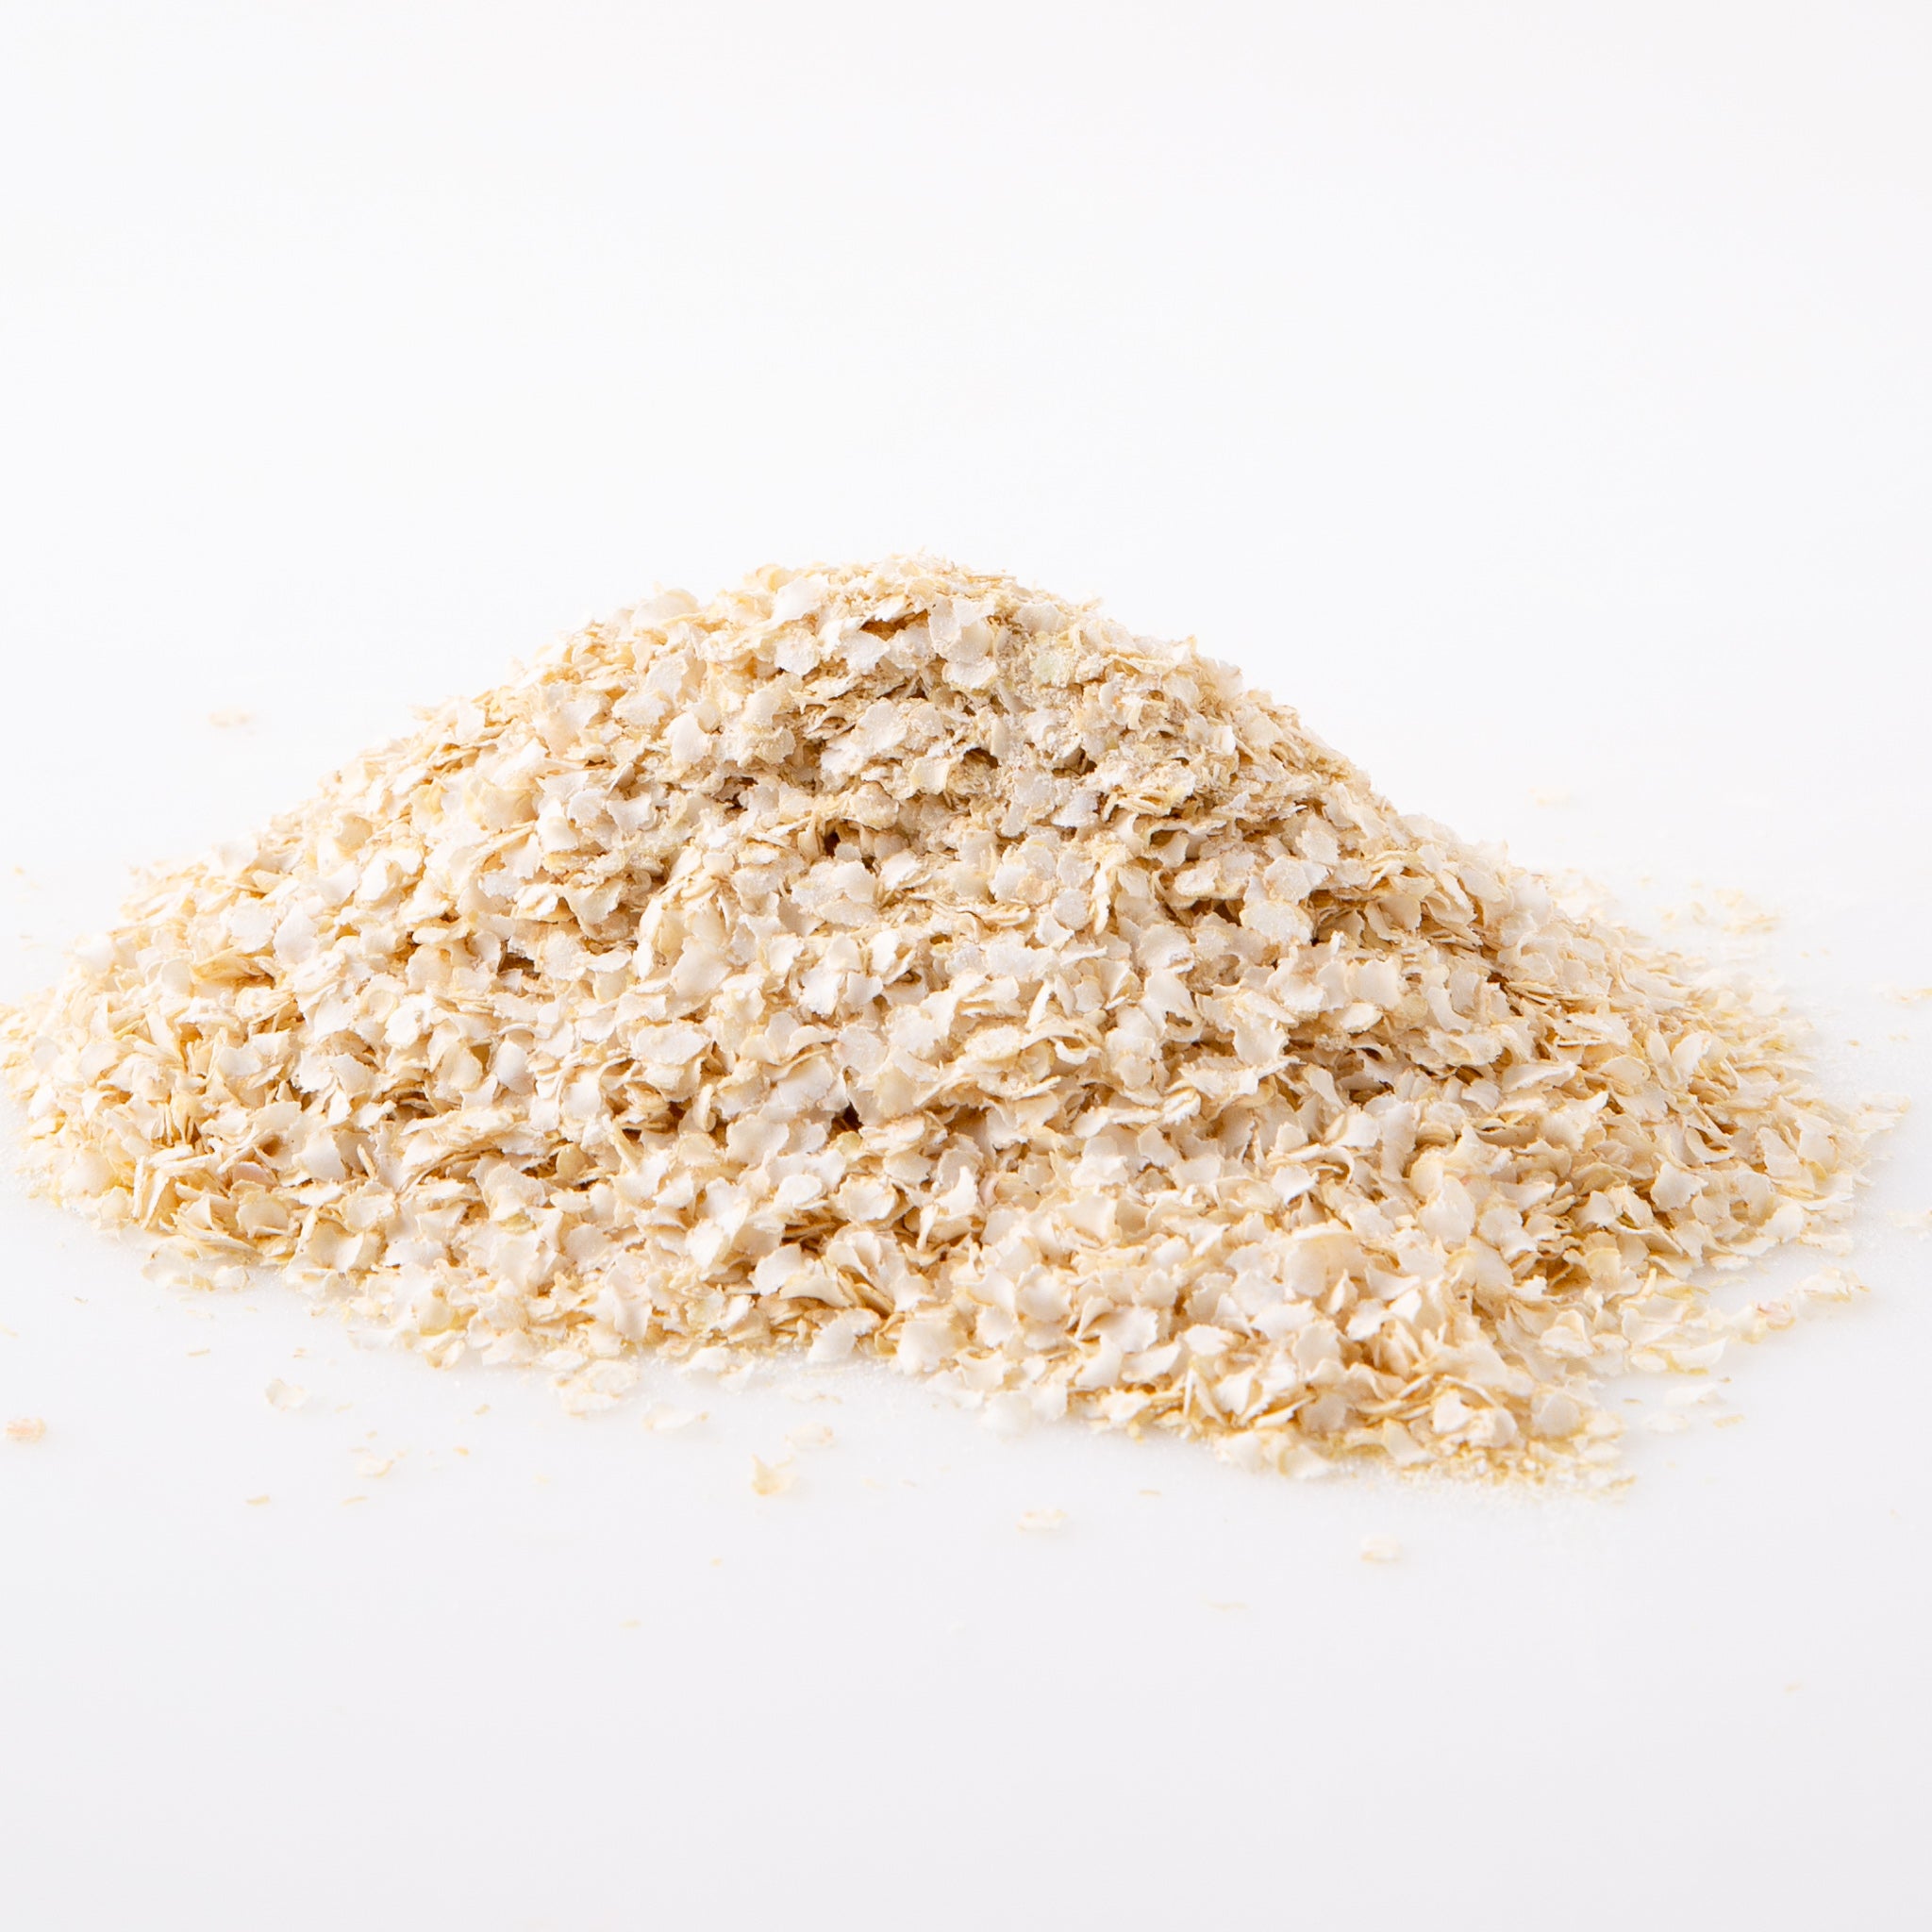 Organic Rolled Flaked Quinoa (Cereals) Image - Naked Foods